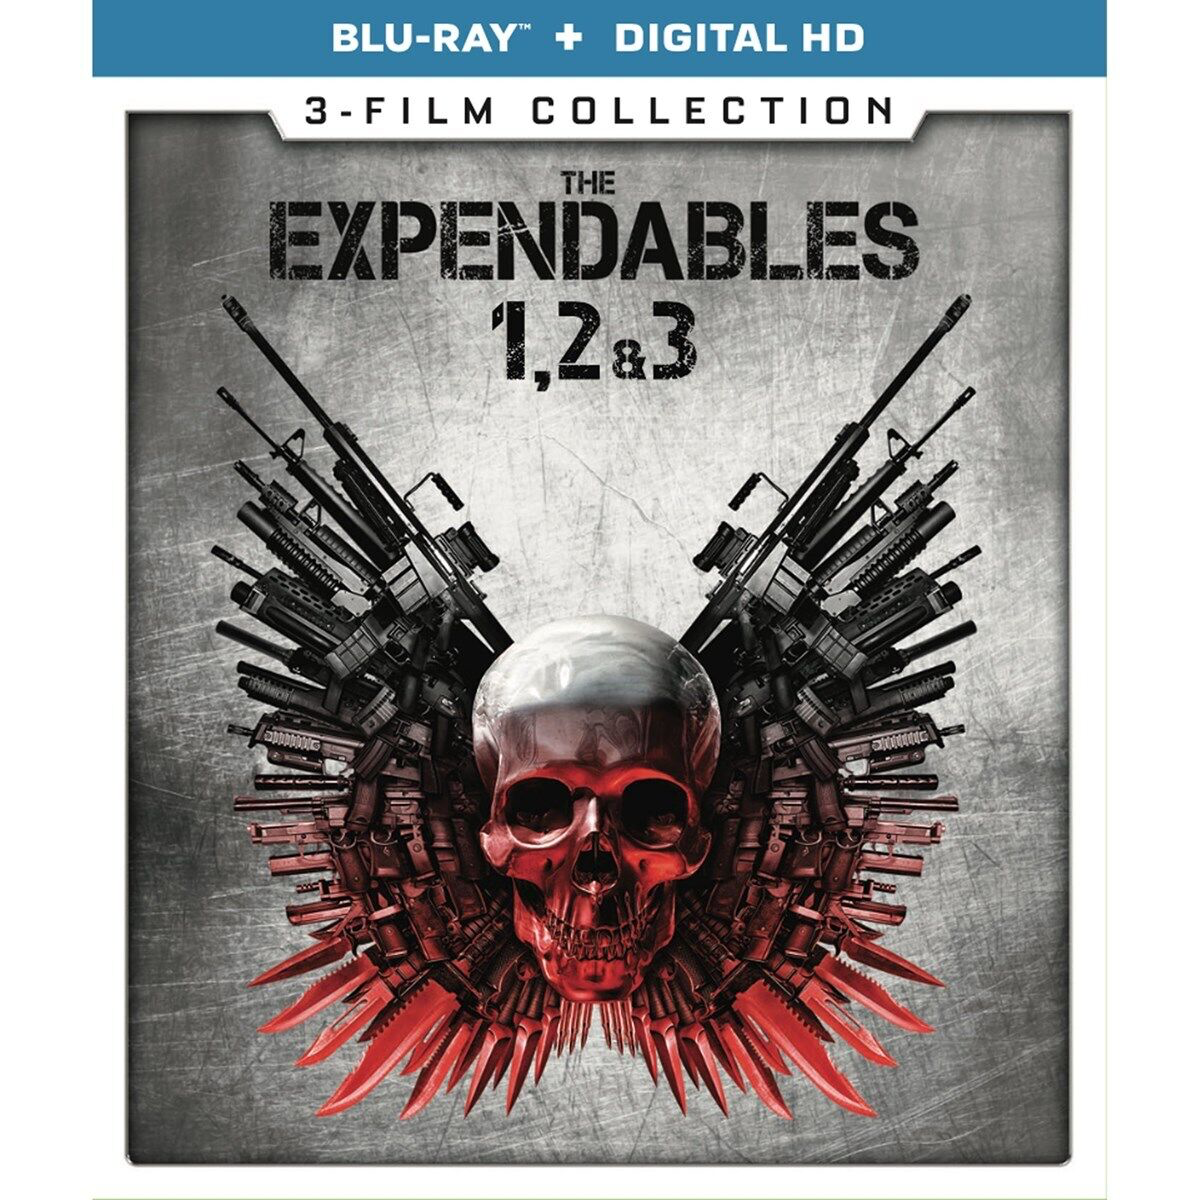 Expendables 3-Film Collection: Expendables / Expendables 2 / Expendables 3 - Blu-ray Action/Adventure VAR R